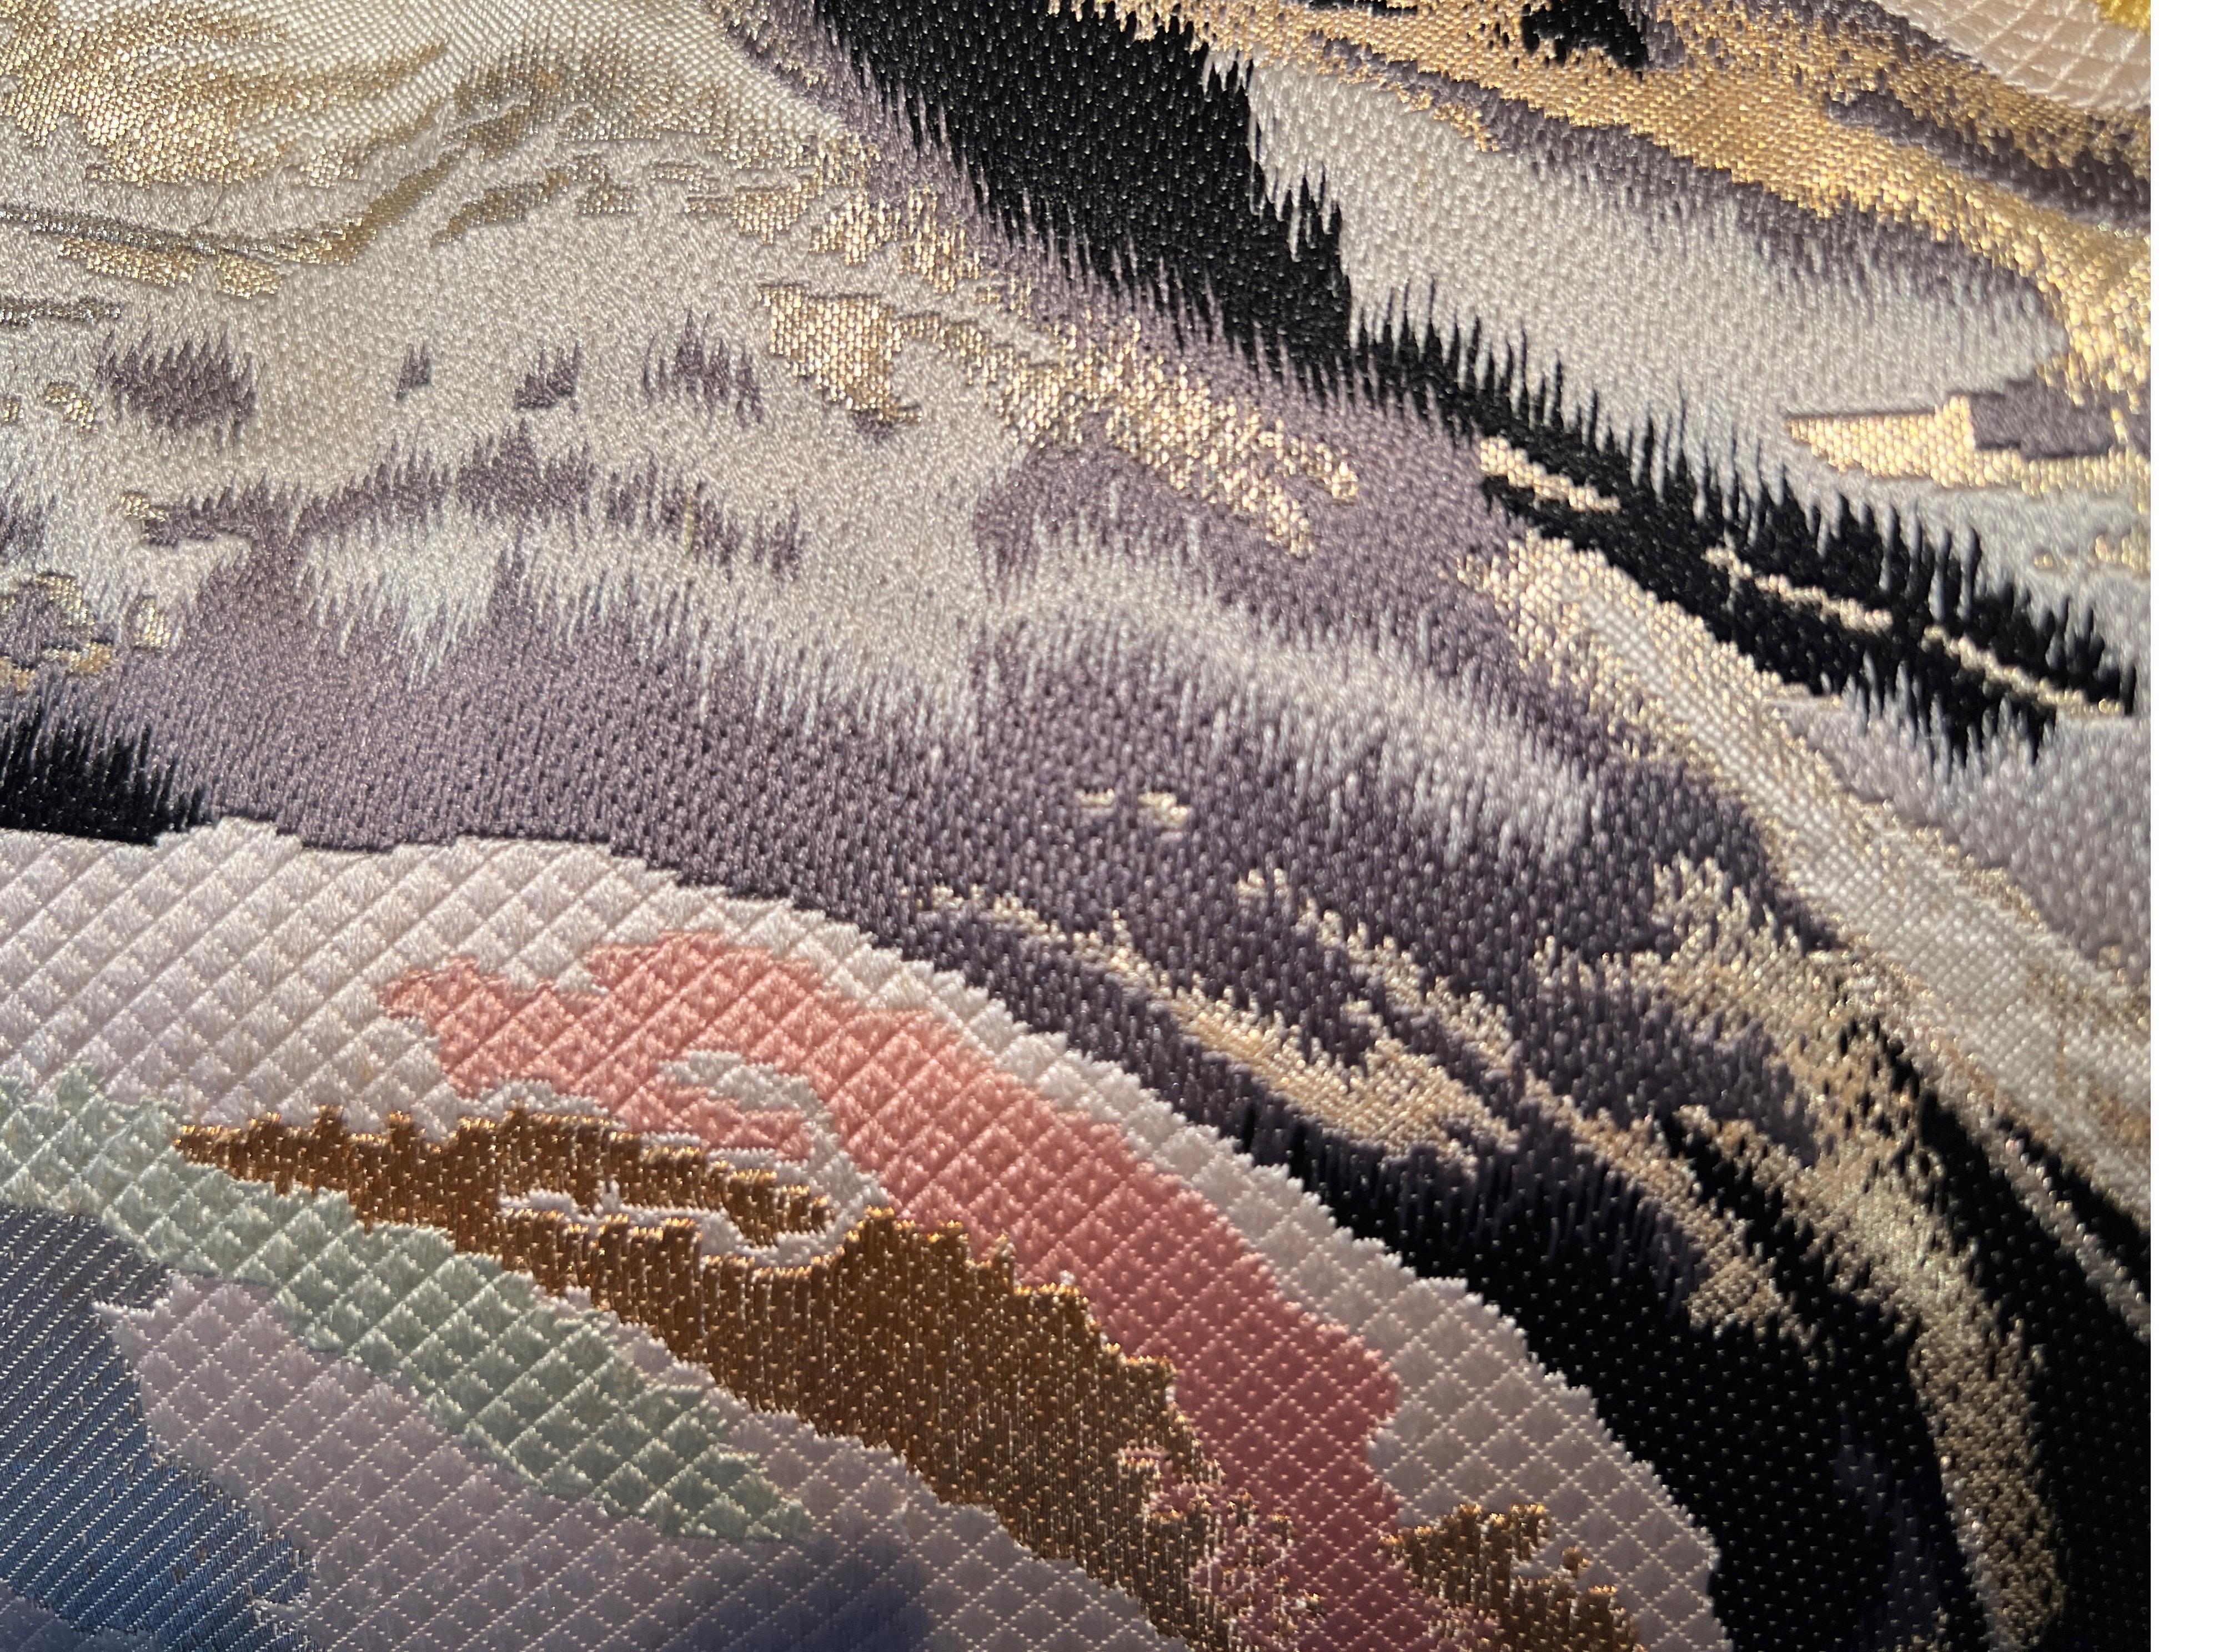 A spectacular lombar pillow wowen in silk and metal threads.

Buying handmade cushions from Sinapango Interiors Paris, crafted from vintage Obi silk made in Nishijin district in Kyoto Japan not only adds an elegant touch but also brings a unique